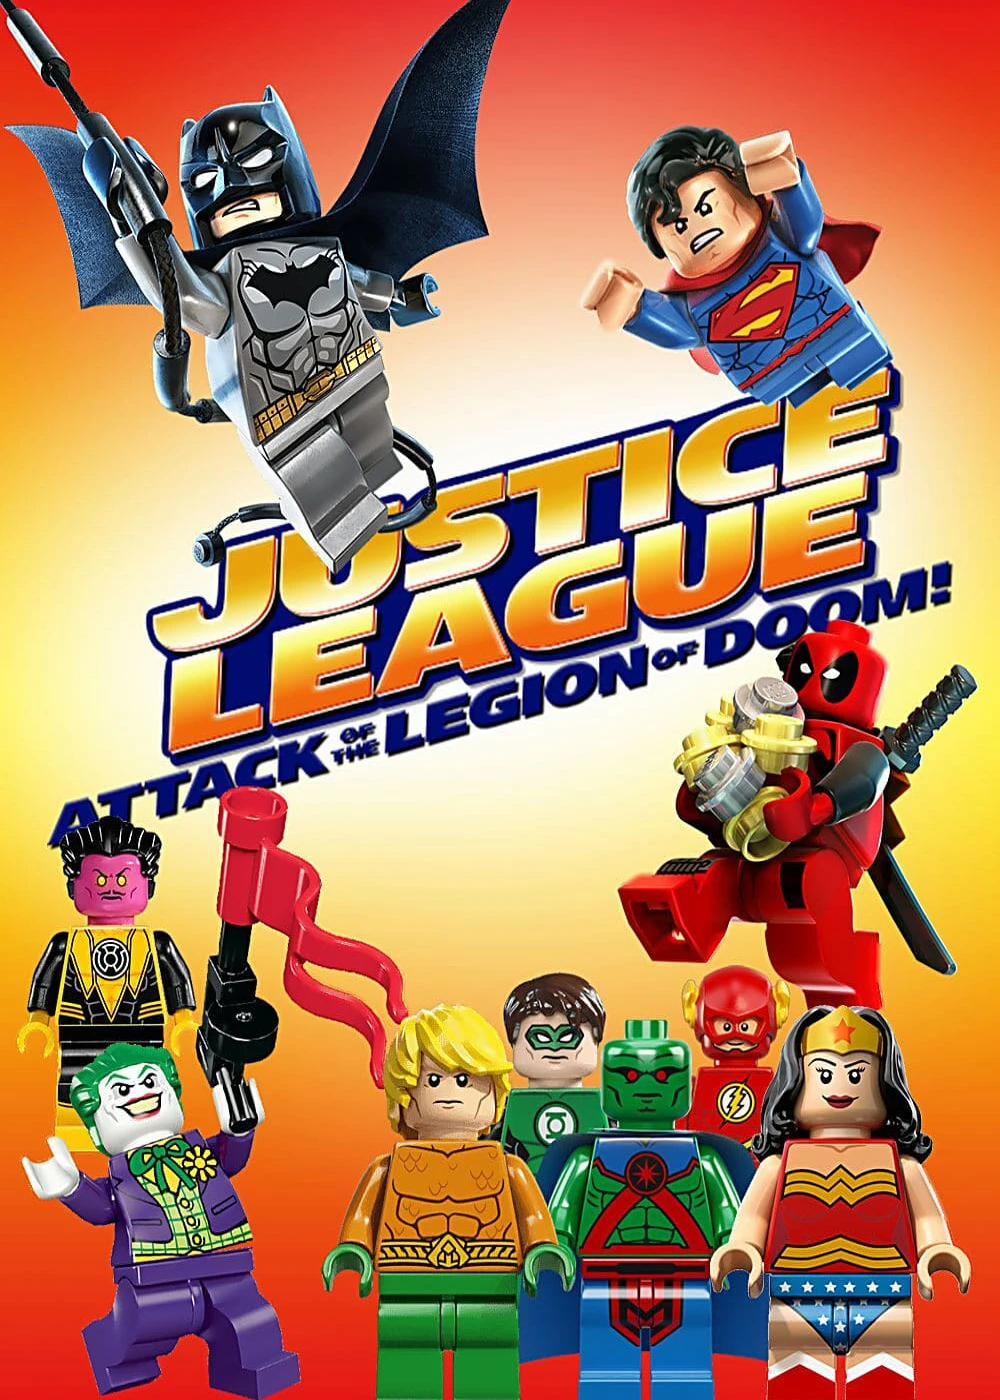 LEGO DC Super Heroes - Justice League: Attack of the Legion of Doom! | LEGO DC Super Heroes - Justice League: Attack of the Legion of Doom! (2015)